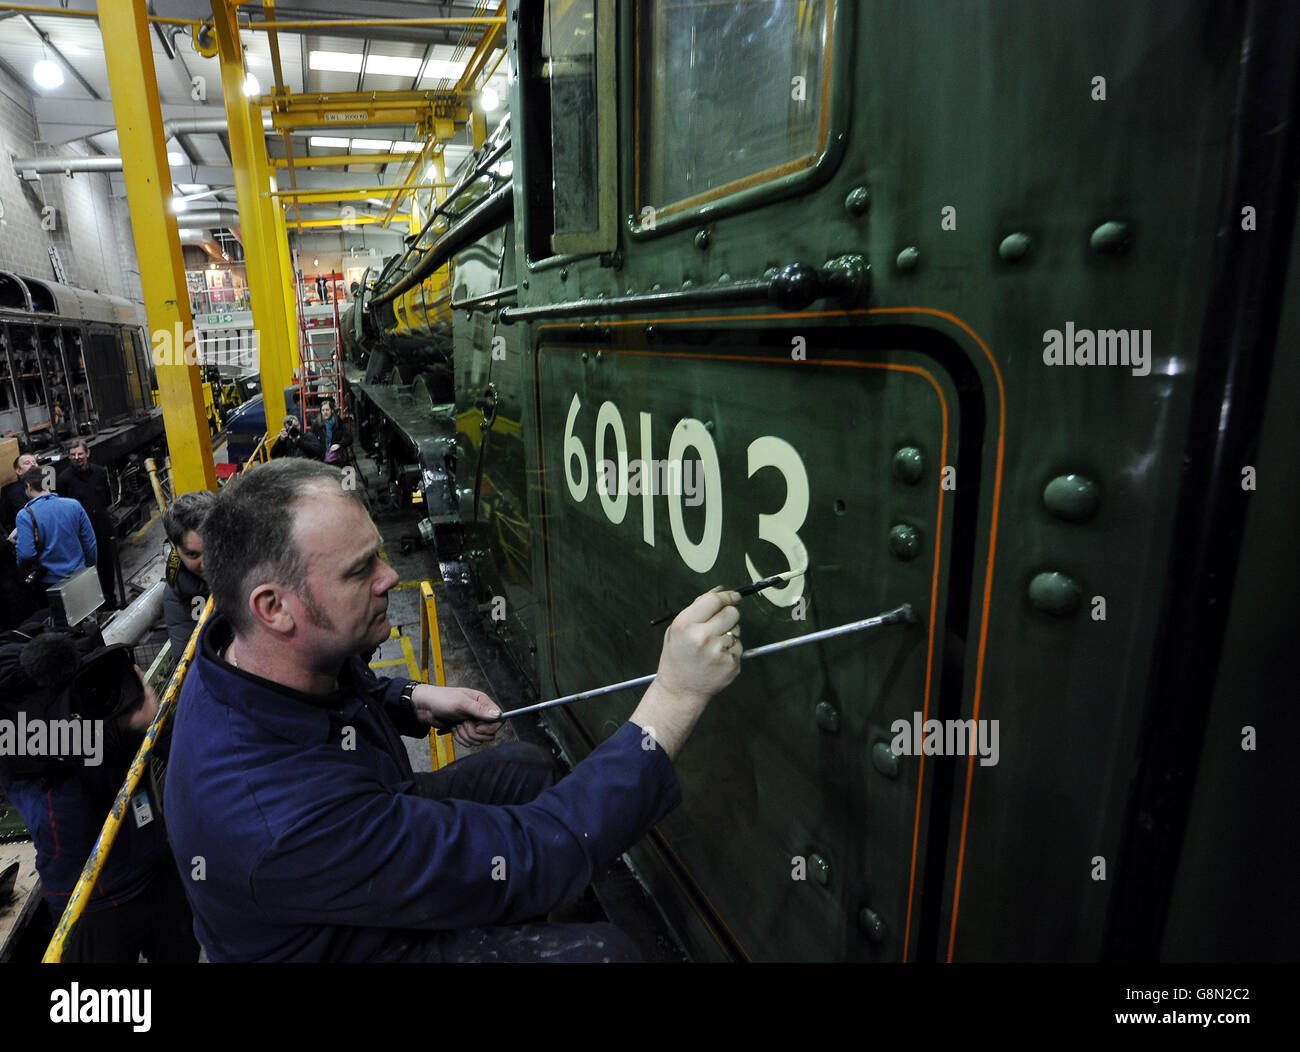 Heritage painter Mike O'Connor paints in the engine number onto the new green livery of the Flying Scotsman ahead of its official return to steam next week, in a workshop at the National Railway Museum in York. Stock Photo